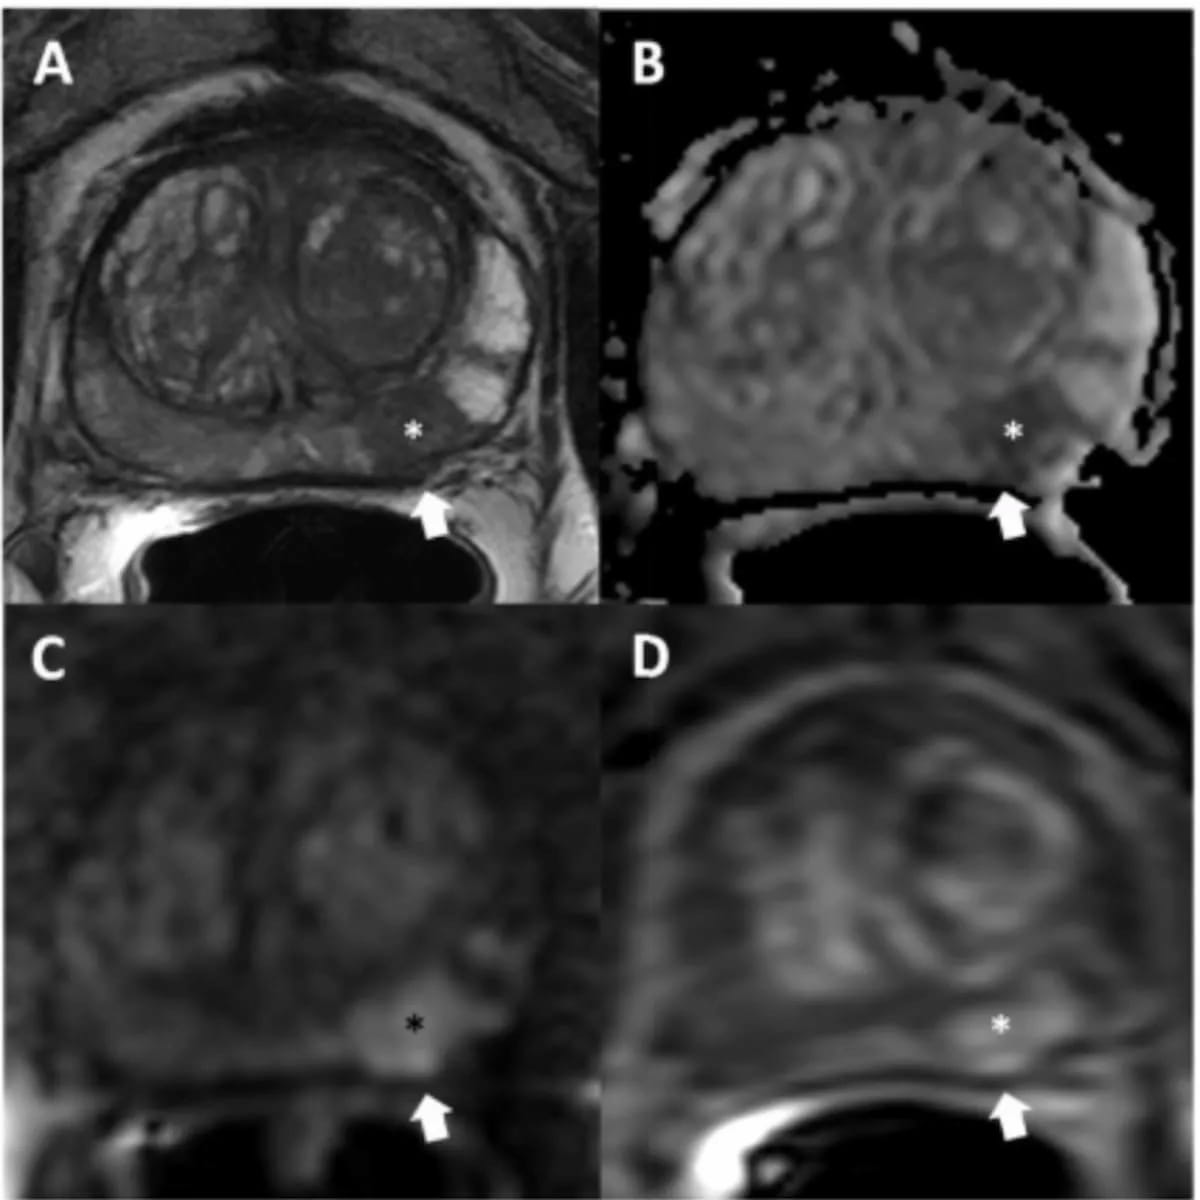 Predicting Clinically Significant Prostate Cancer: Can a Prostate MRI Point-Based Model Have an Impact?